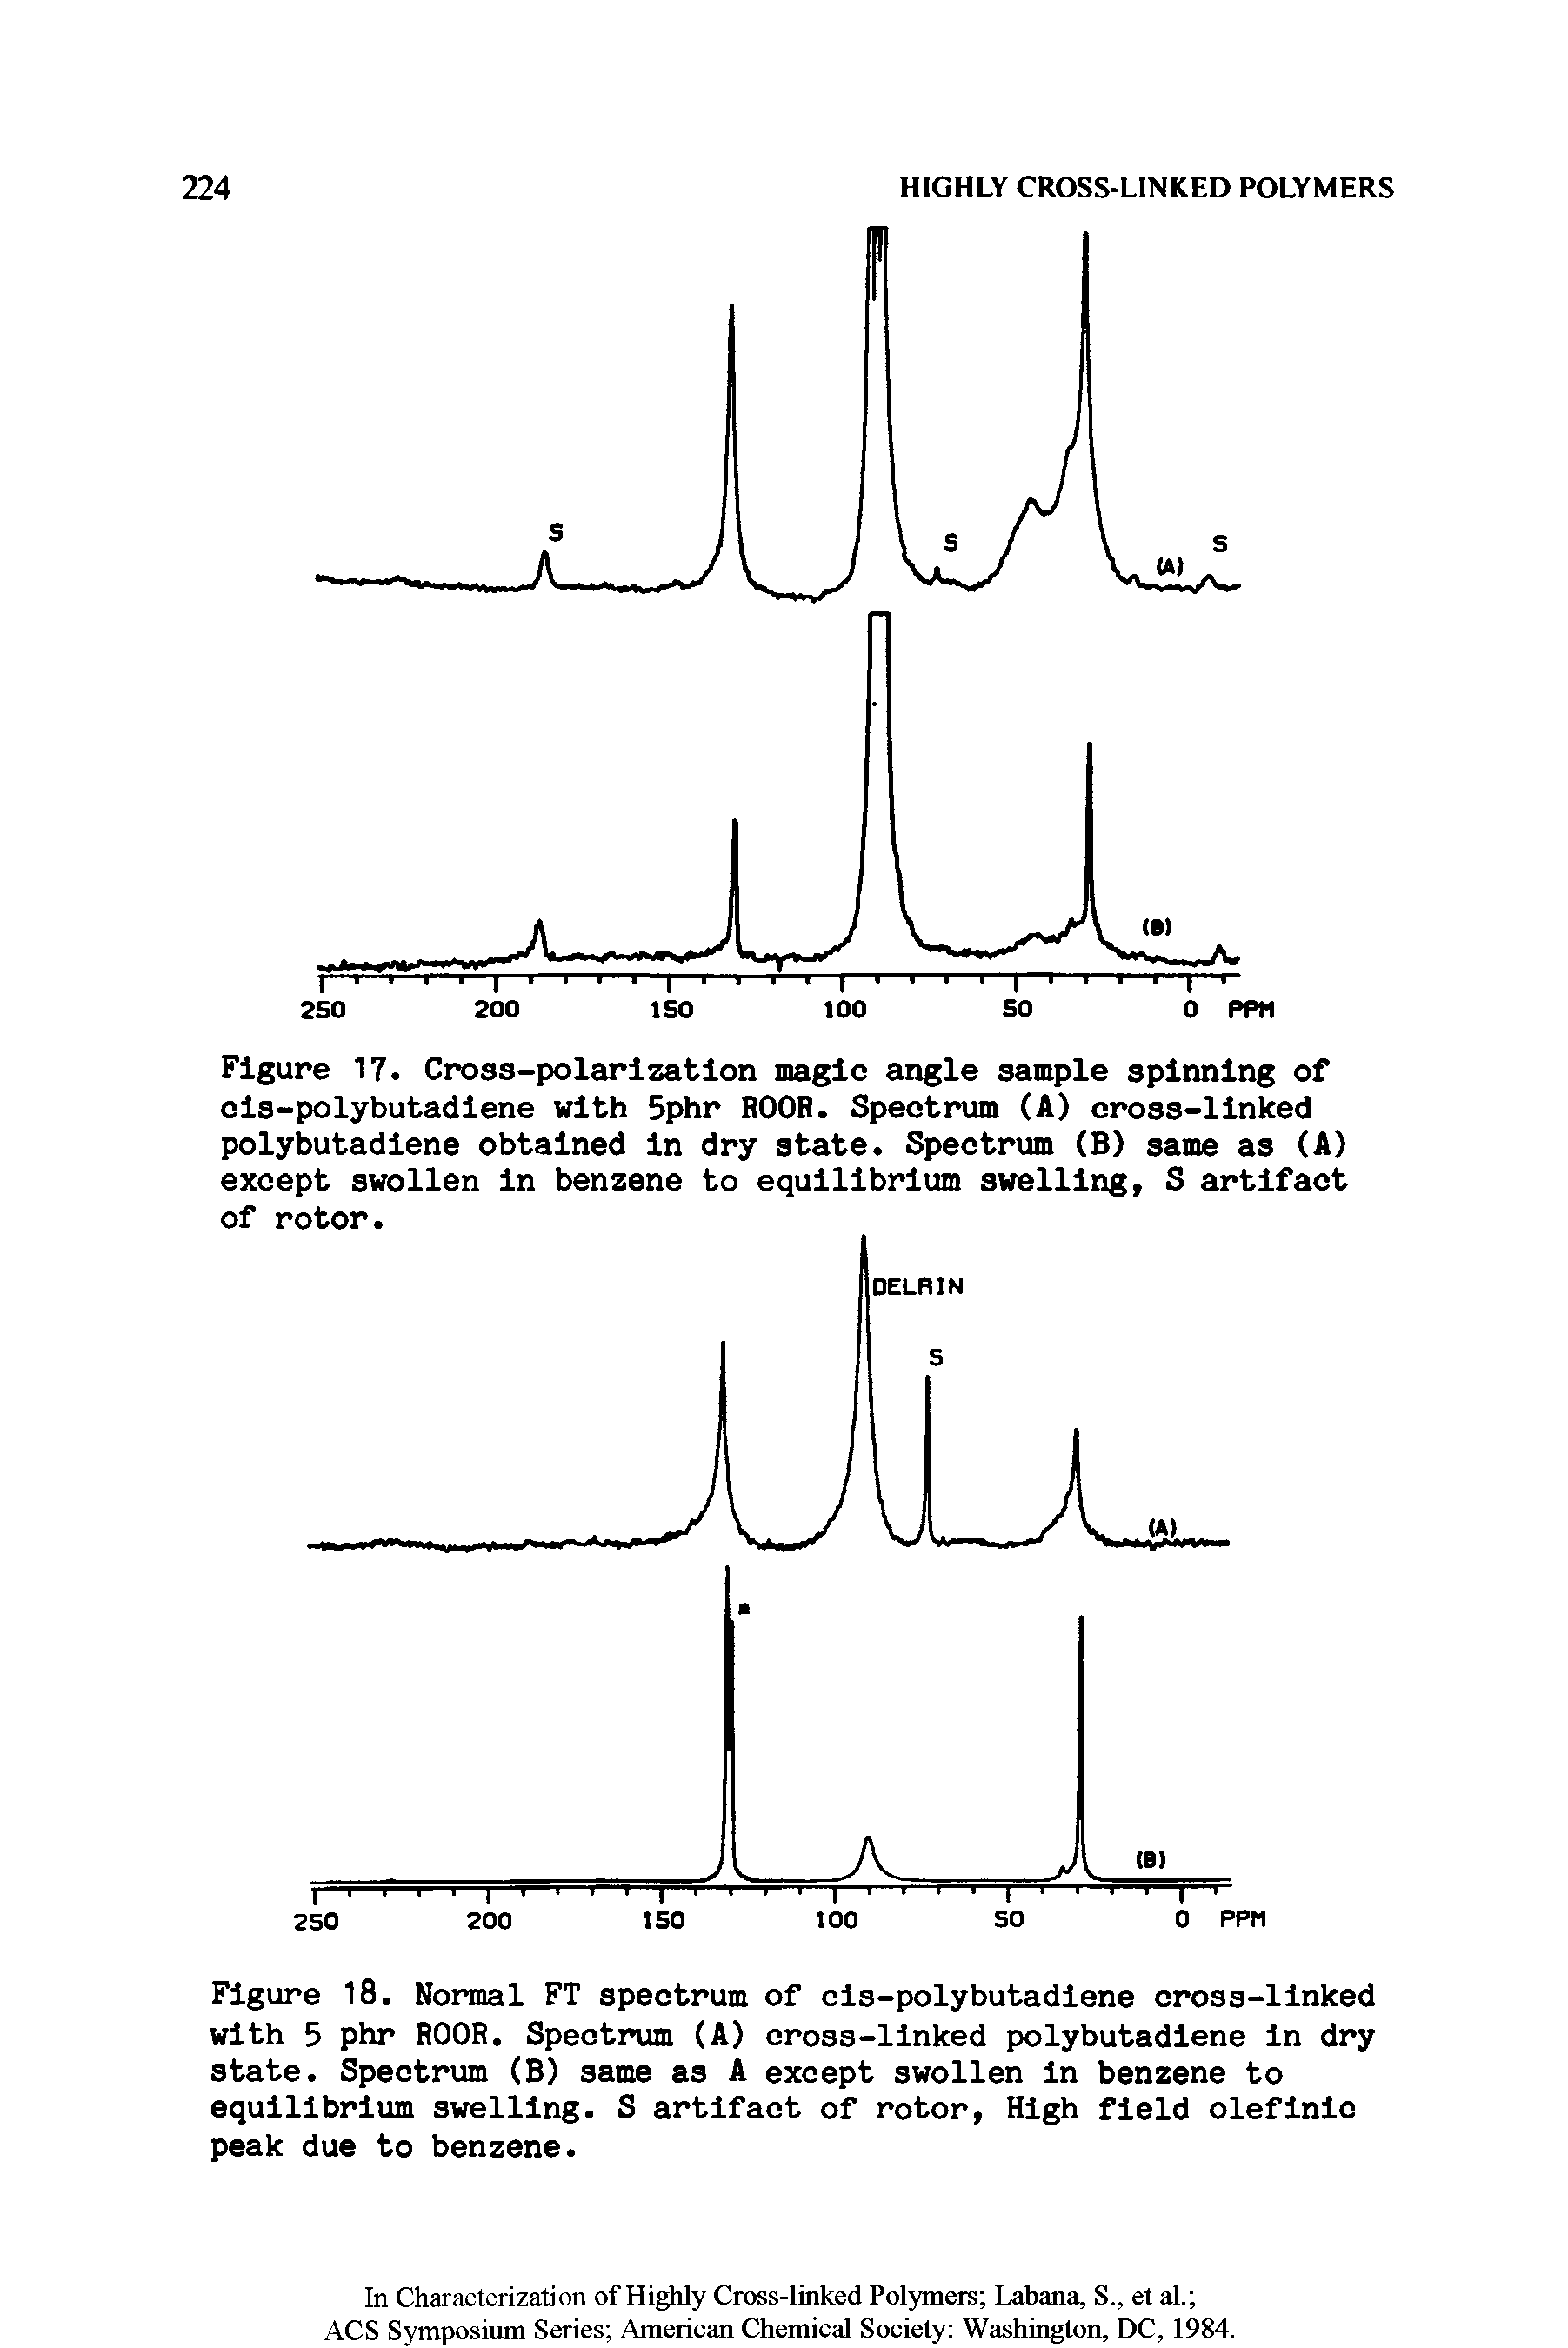 Figure 17. Cross-polarization magic angle sample spinning of cis-polybutadiene with 5phr ROOR. Spectrum (A) cross-linked polybutadiene obtained in dry state. Spectrum (B) same as (A) except swollen in benzene to equilibrium swelling, S artifact of rotor.